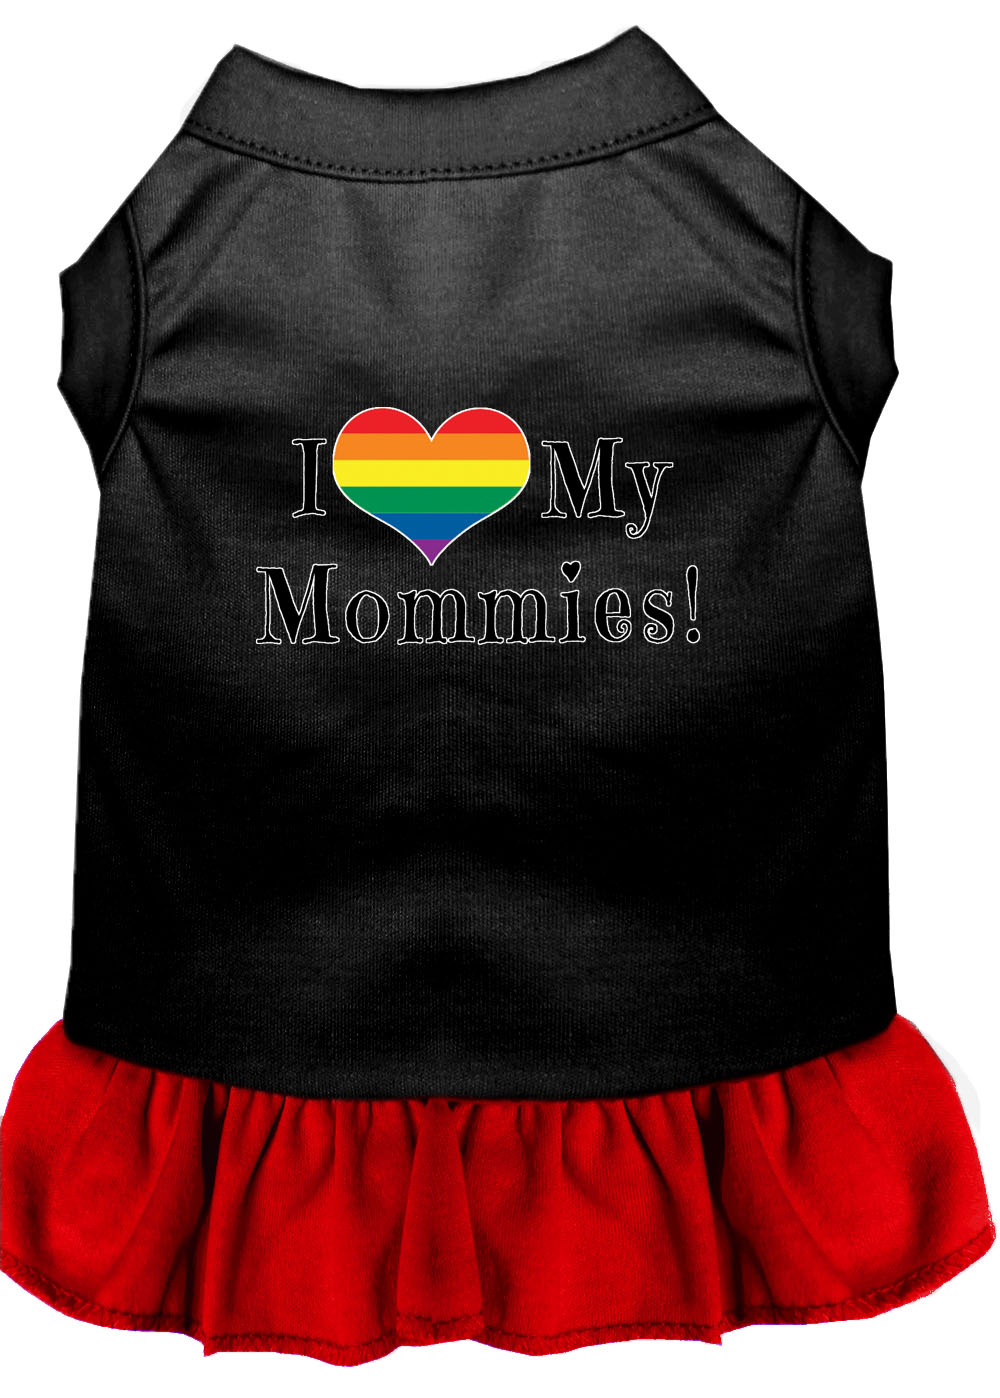 I Heart my Mommies Screen Print Dog Dress Black with Red XS